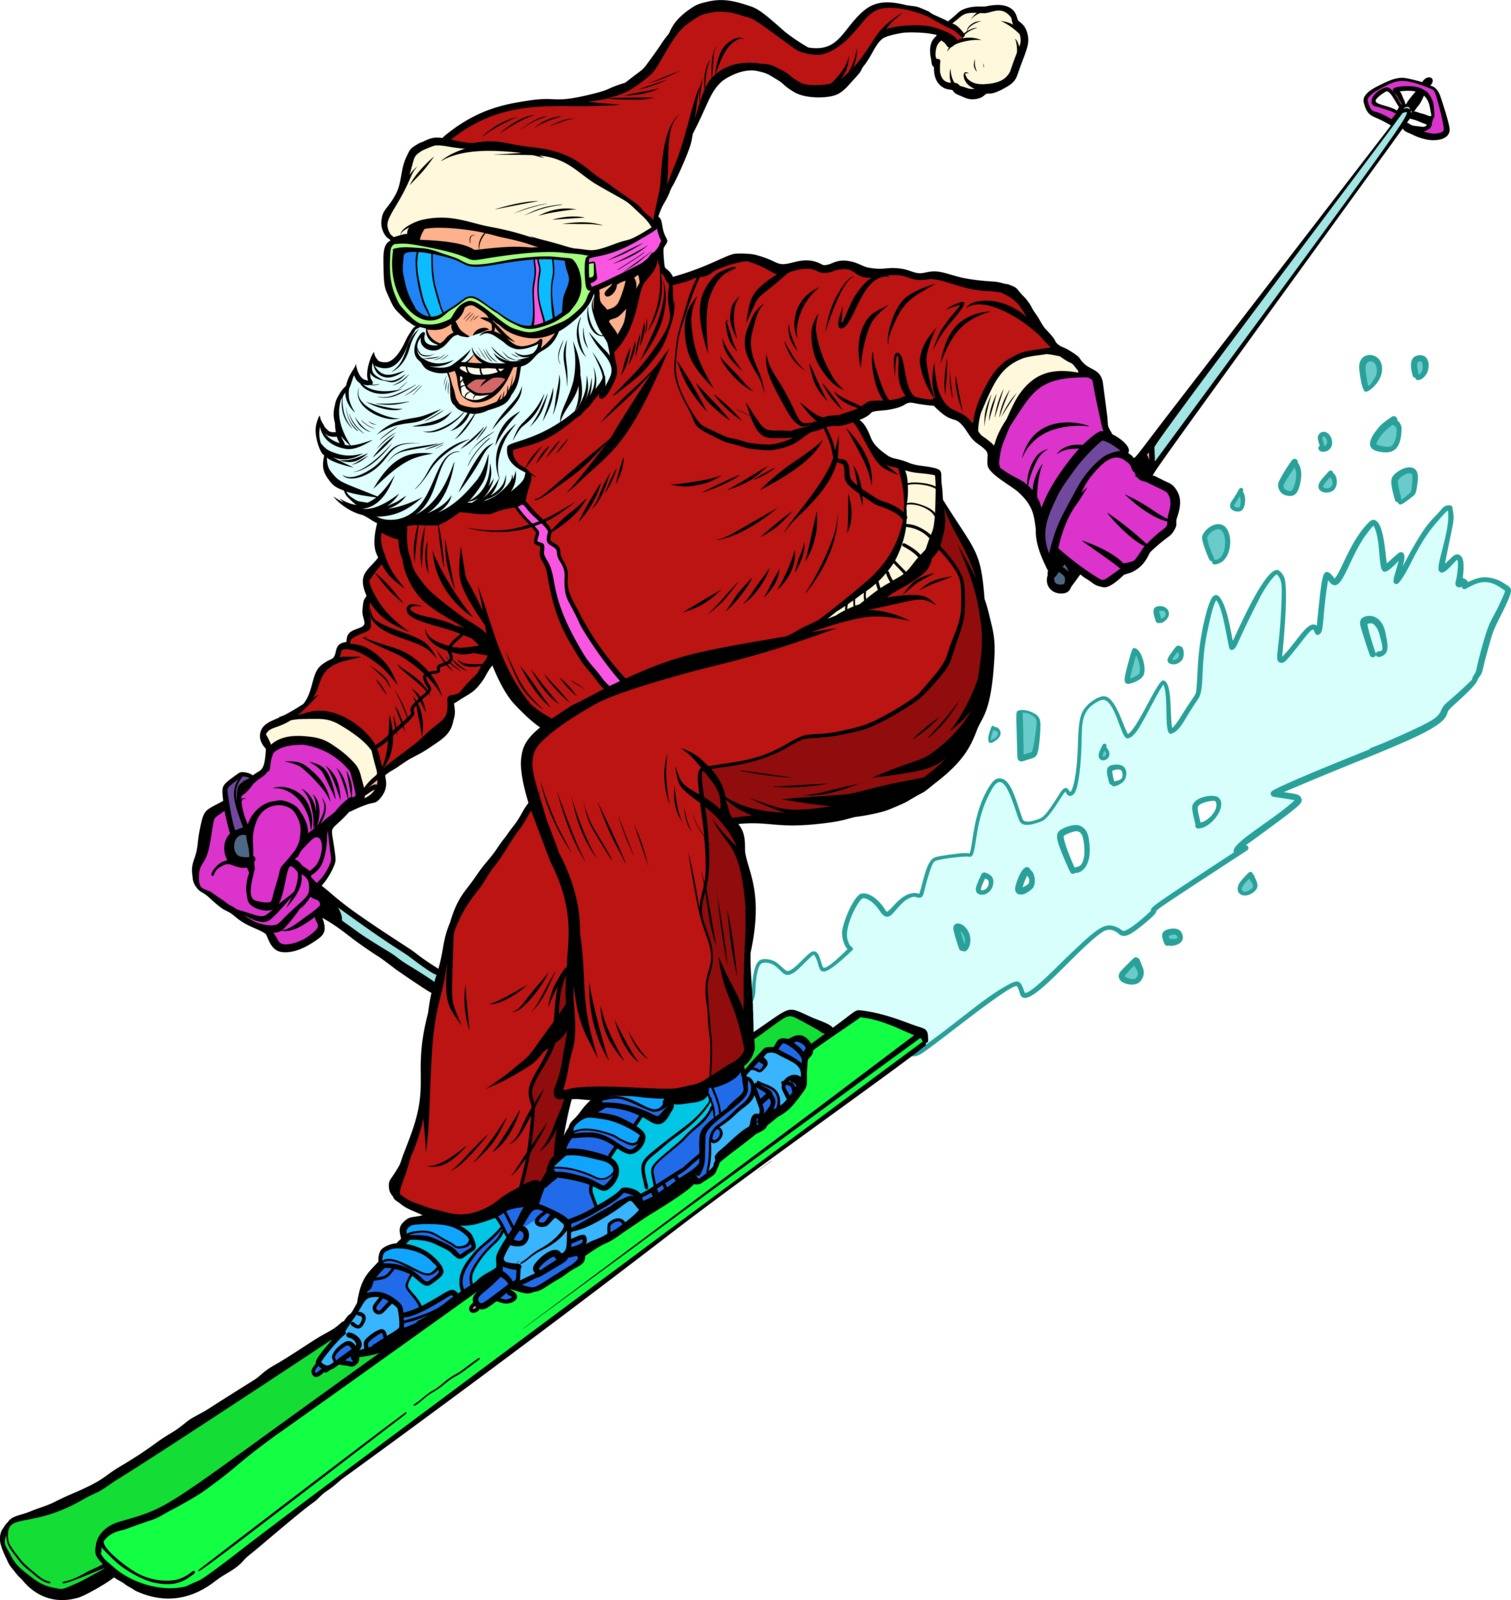 Santa Claus character goes skiing merry Christmas and happy new year by studiostoks